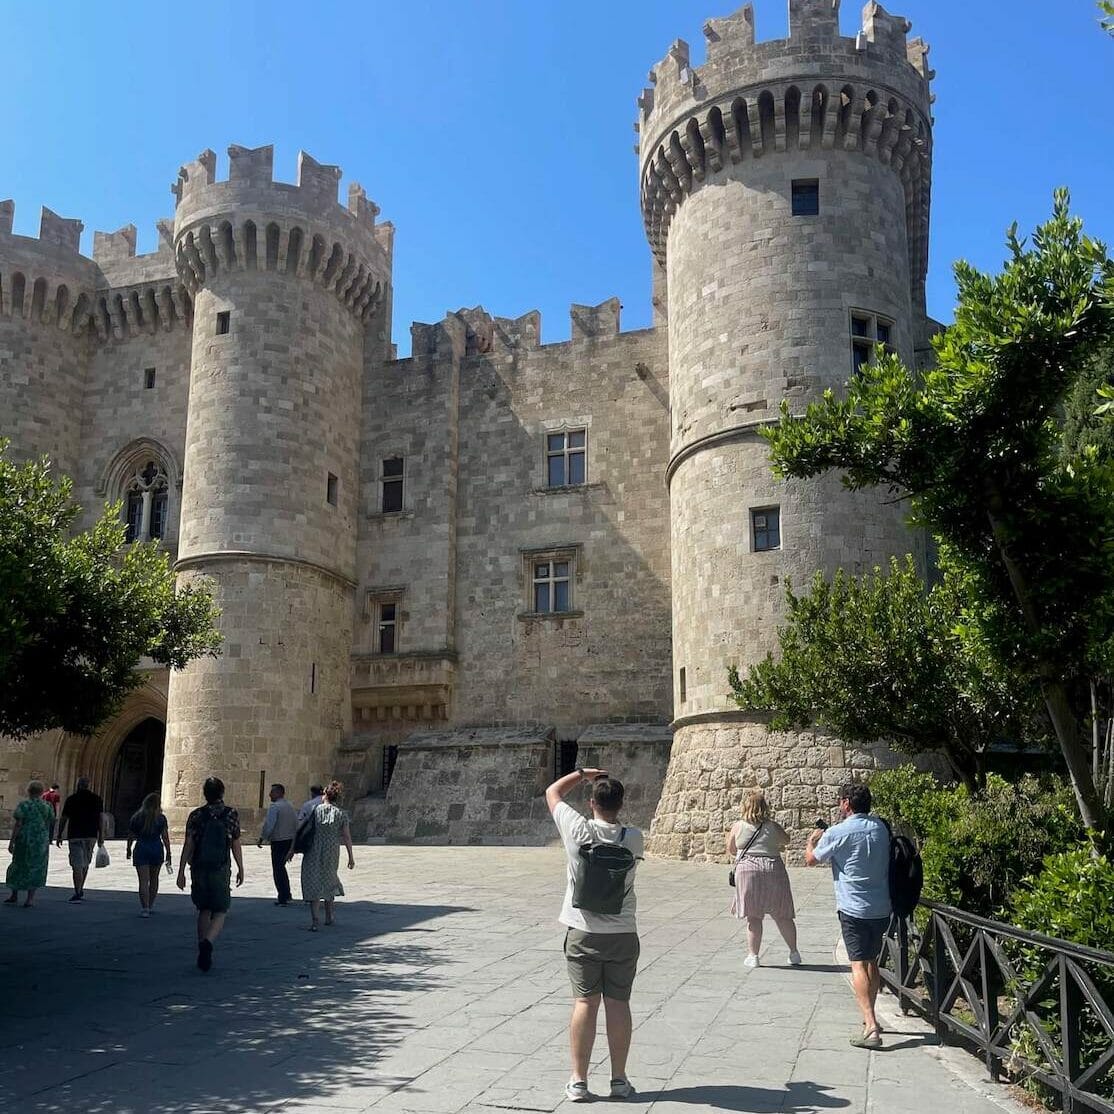 People taking pictures and walking in front of the façade of The Palace Of The Grand Master of The Knights, Rhodes,  Greece